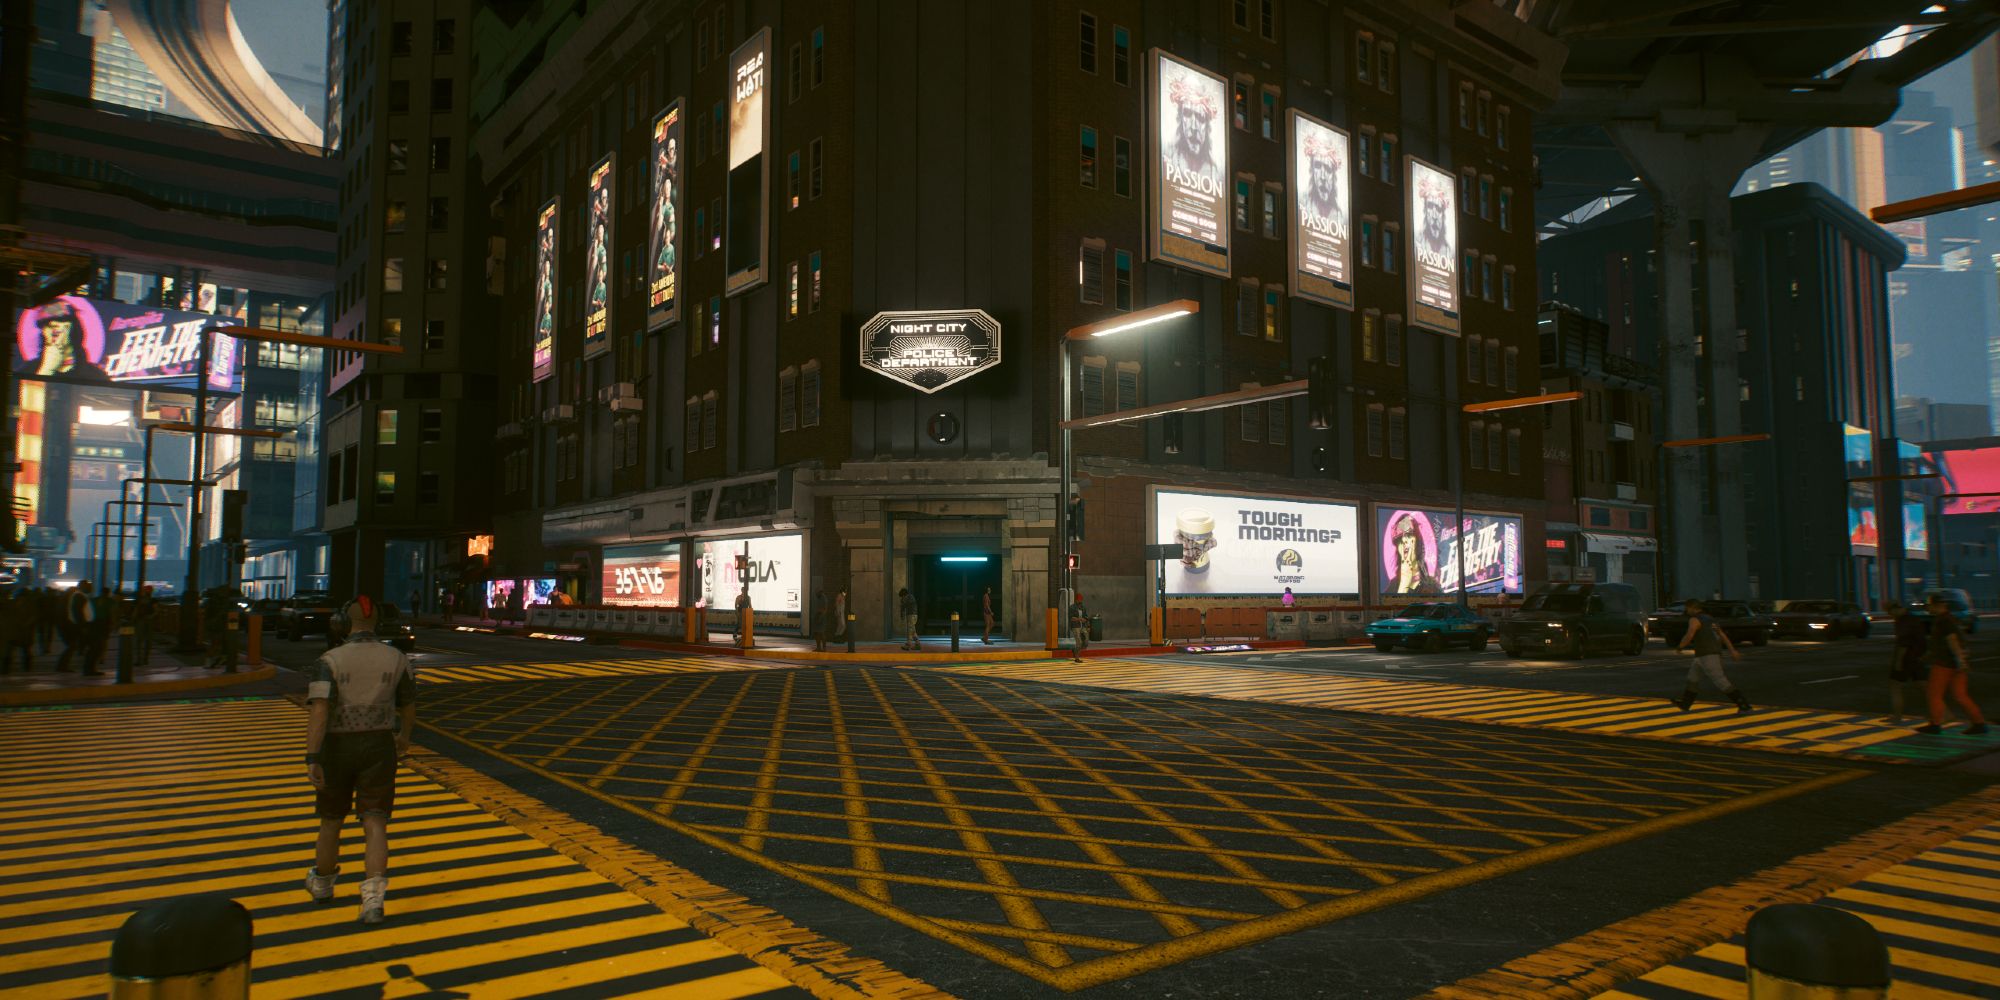 The main NCPD offices in Cyberpunk 2077, seen from afar.